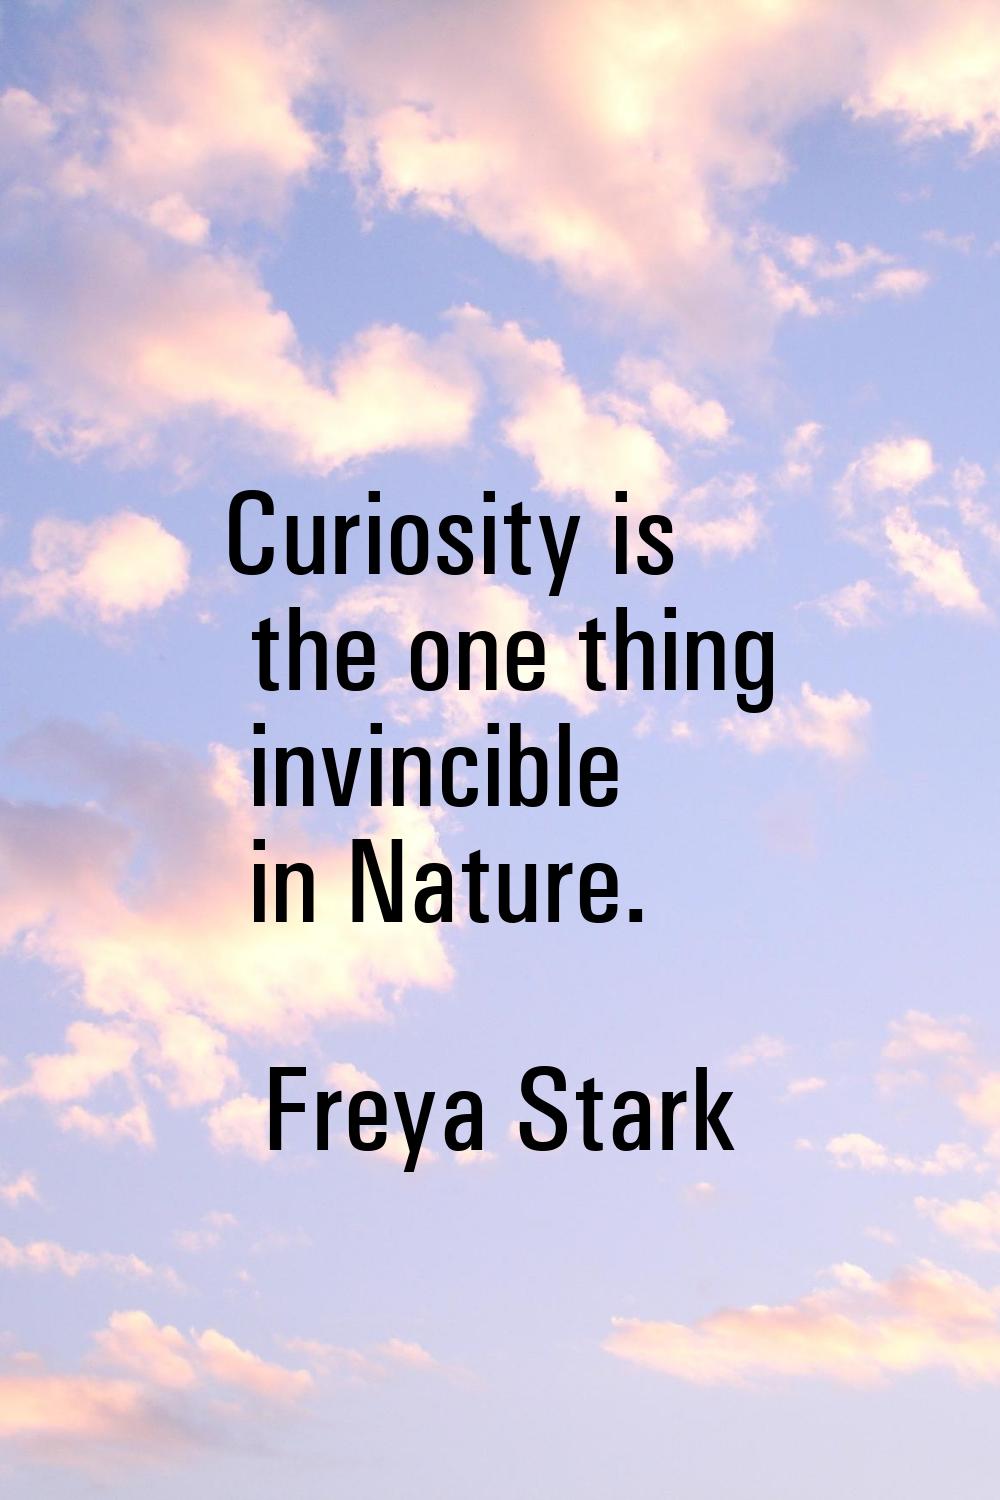 Curiosity is the one thing invincible in Nature.